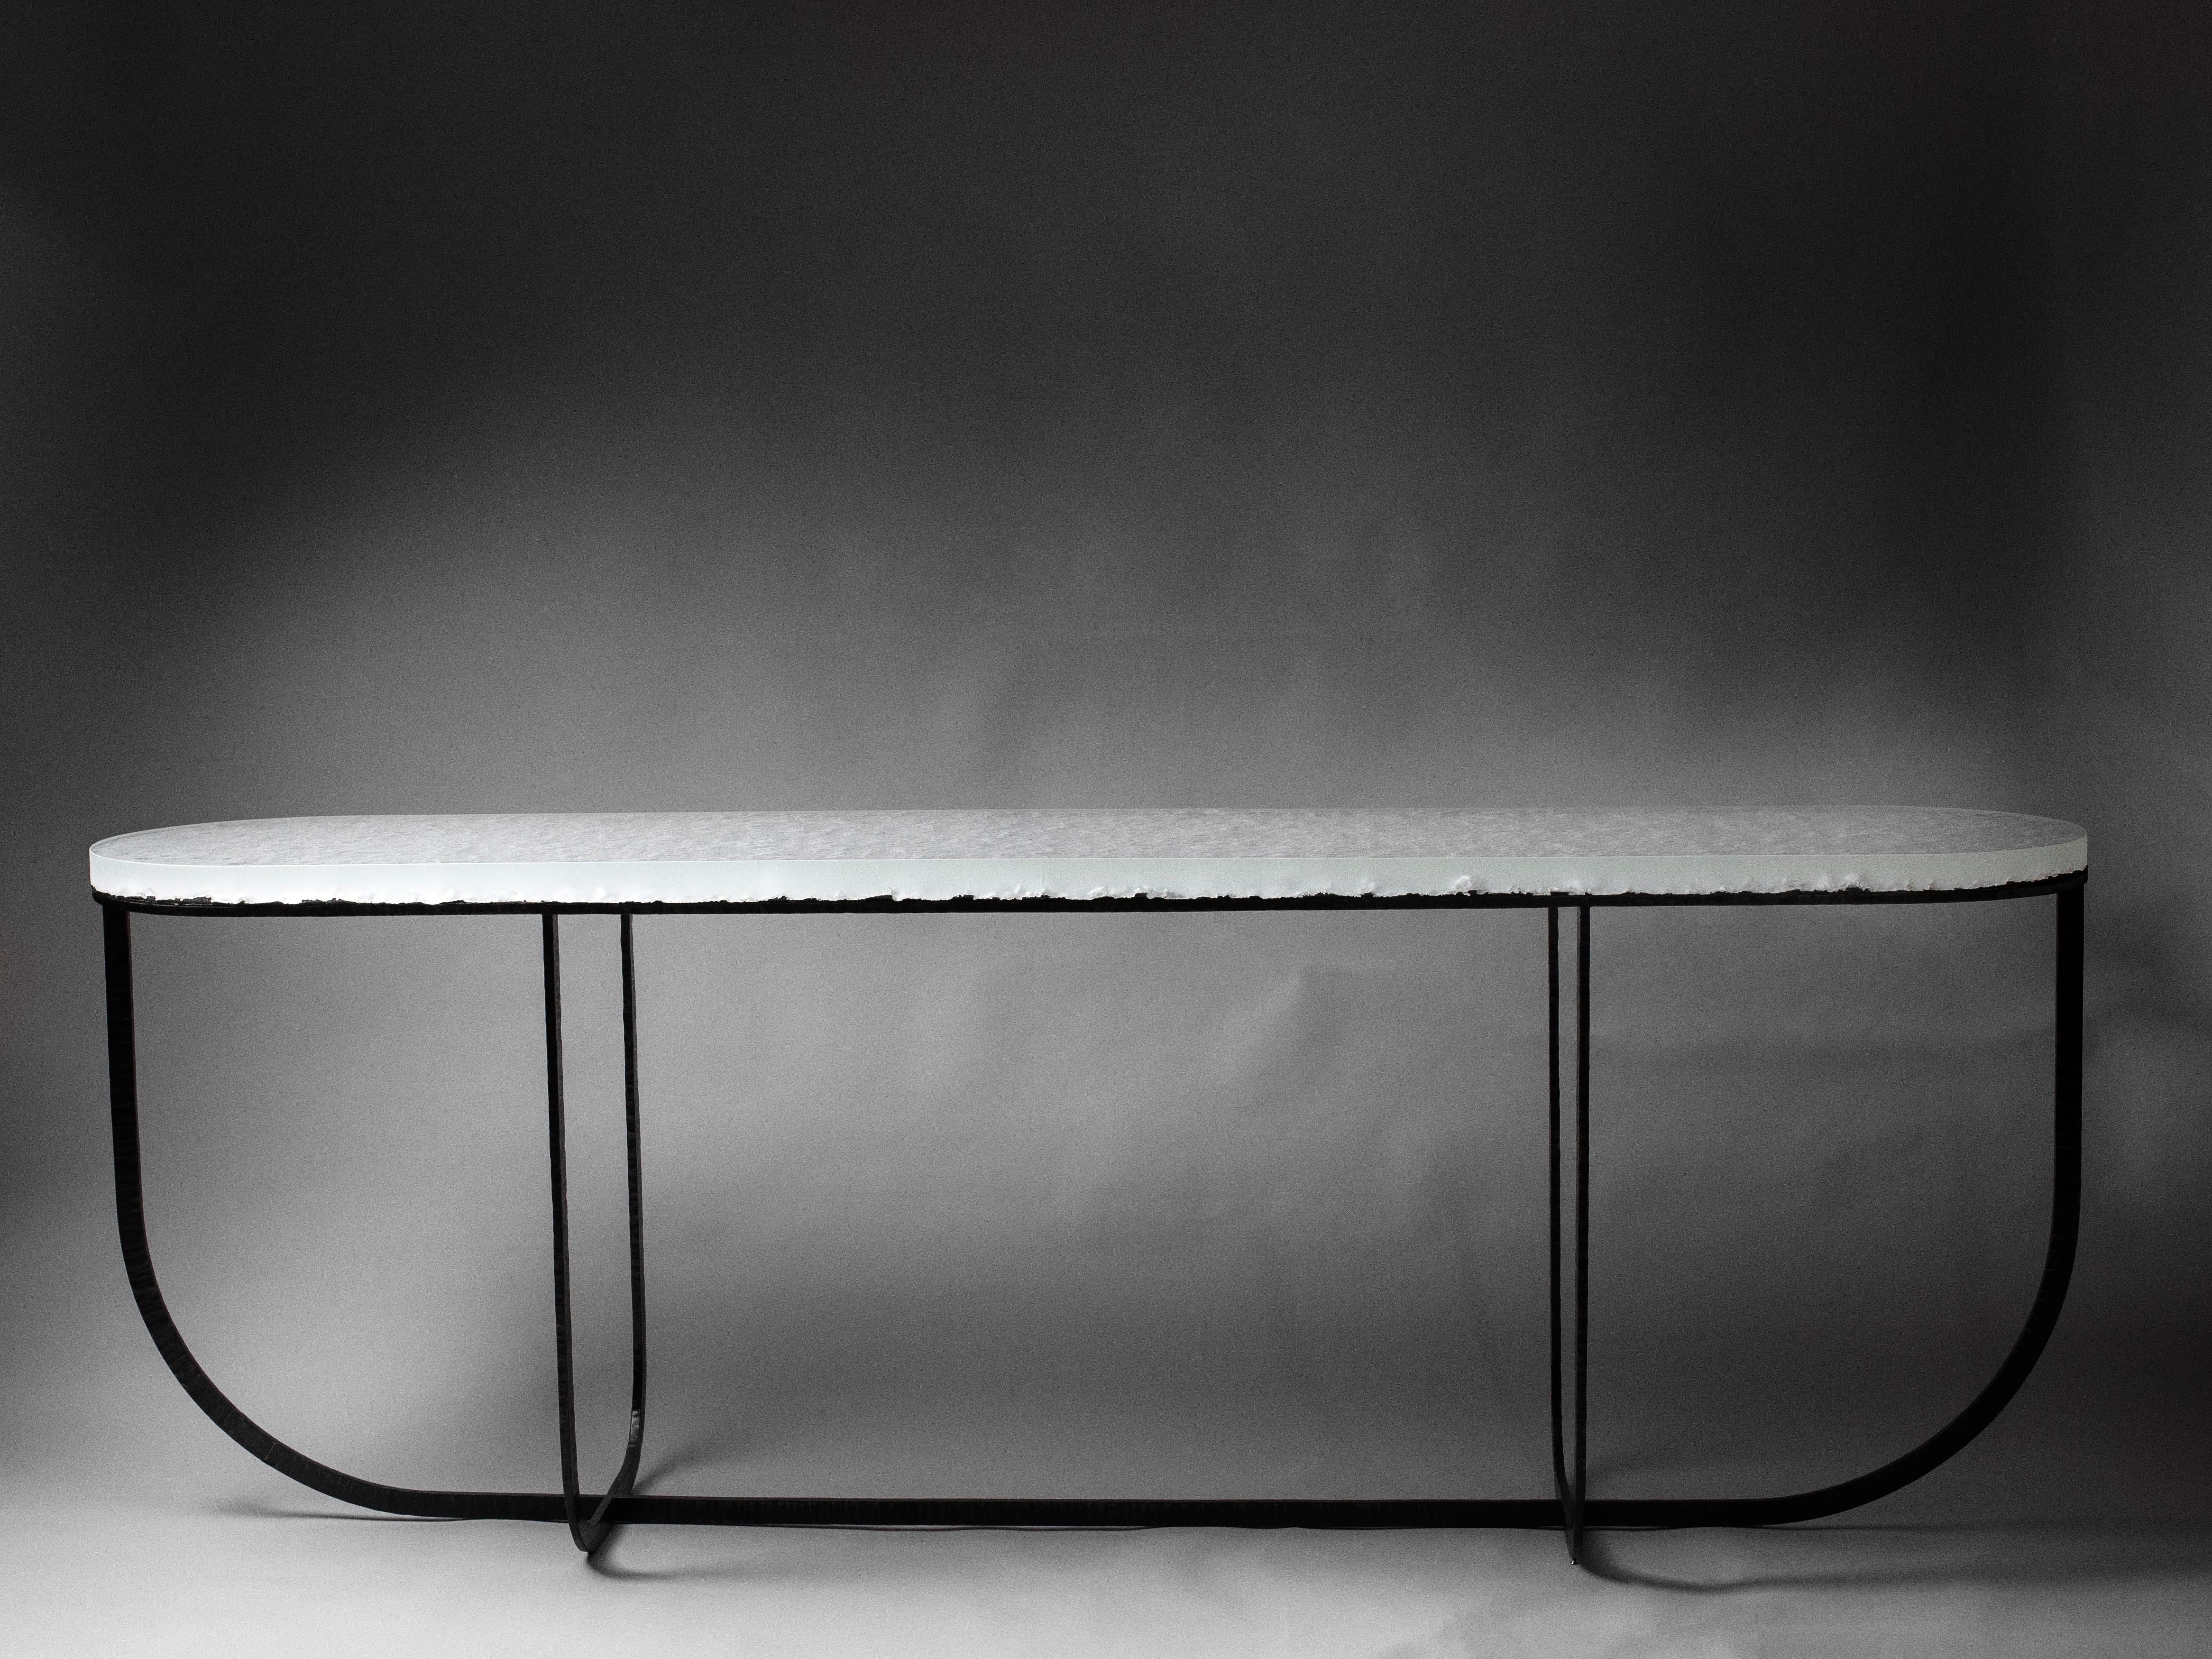 Yugen Console by Matthieu Gicquel
Dimensions: D 50 x W 230 x H 80 cm.
Materials: Optical glass and patinated metal.
Weight: 140 kg.

Each piece is numbered. Please contact us.

Praise for the moment
Light shines through the glass. Details are